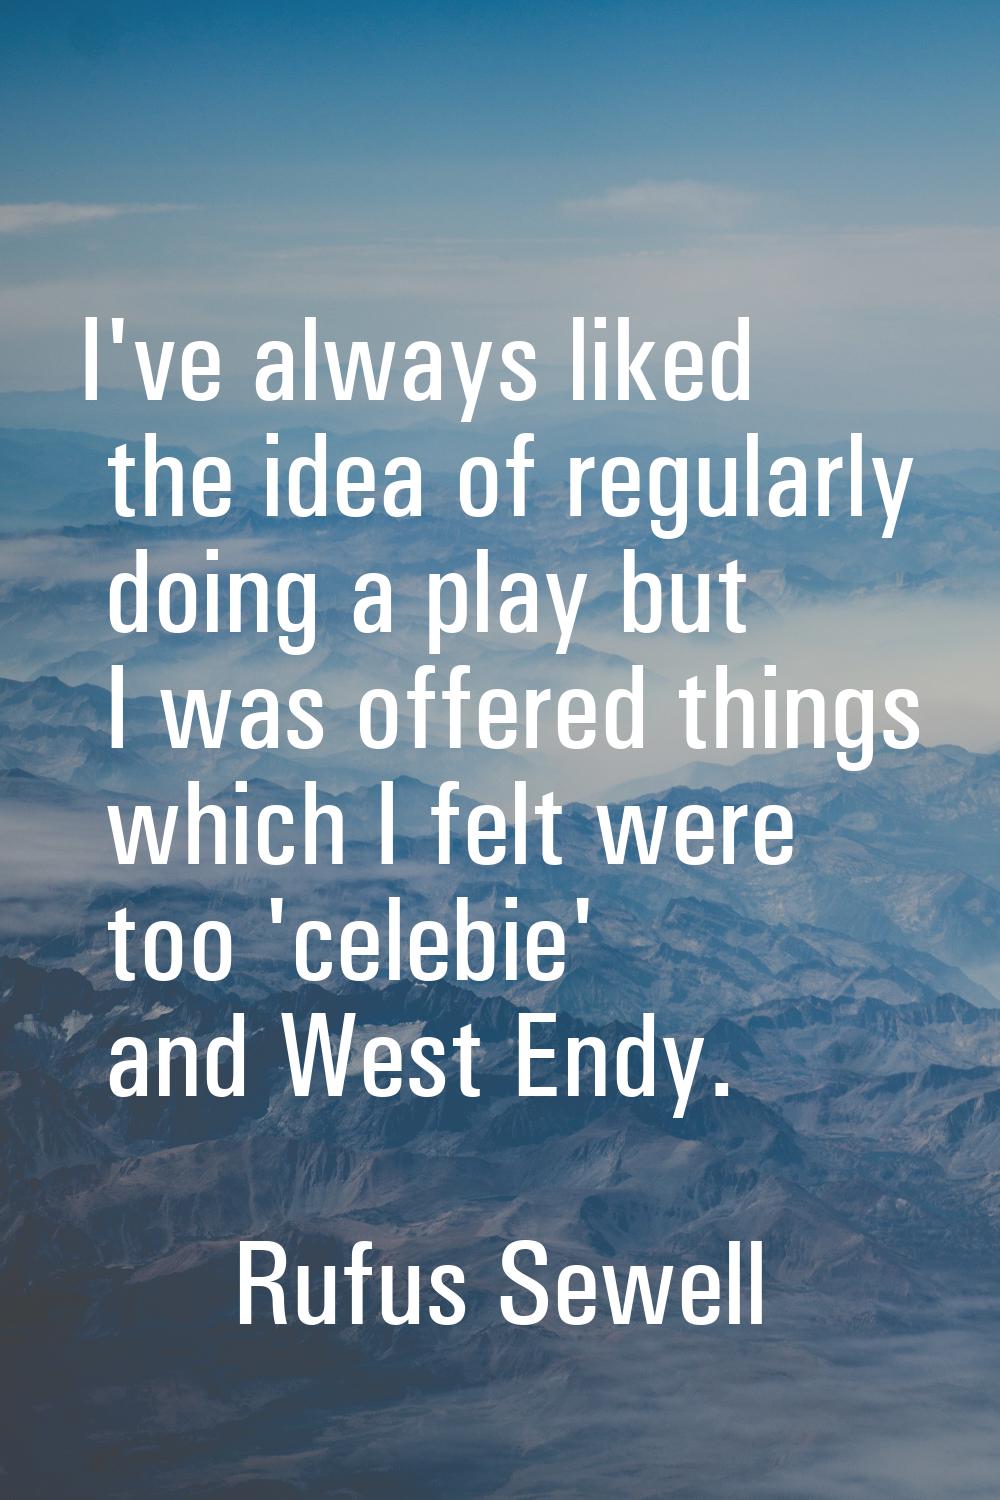 I've always liked the idea of regularly doing a play but I was offered things which I felt were too